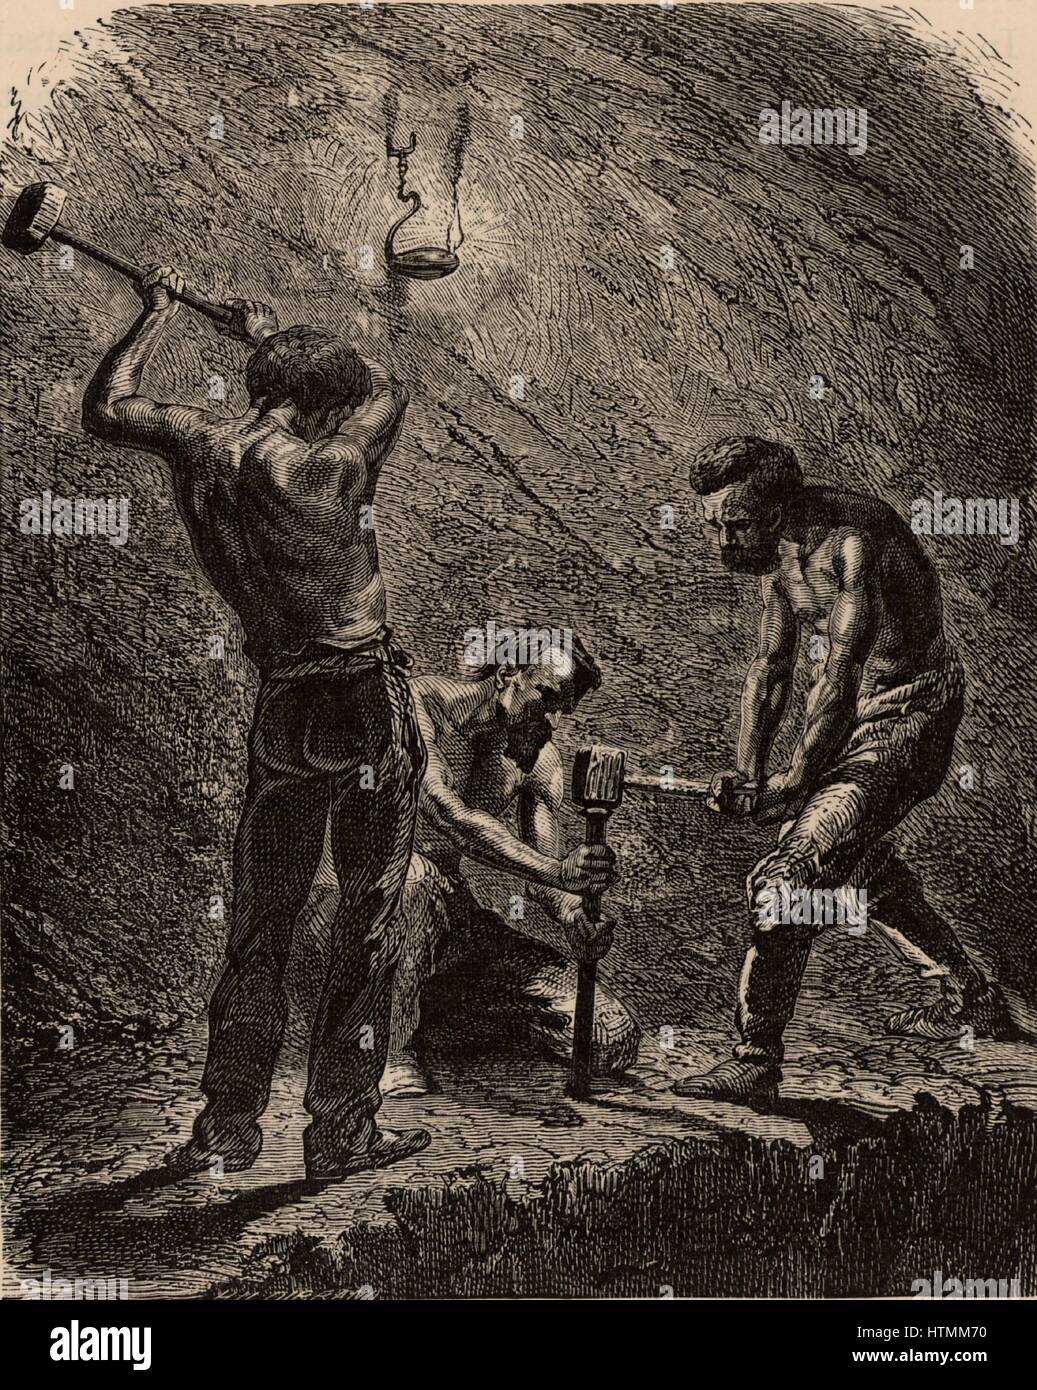 Cornish miners boring a hole to take a charge of explosive. One miner holds the metal borer upright and the two strikers hit it with sledge hammers until the hole has been made. Cornwall, England. From 'Underground Life; or, Mines and Miners' by Louis Sim Stock Photo